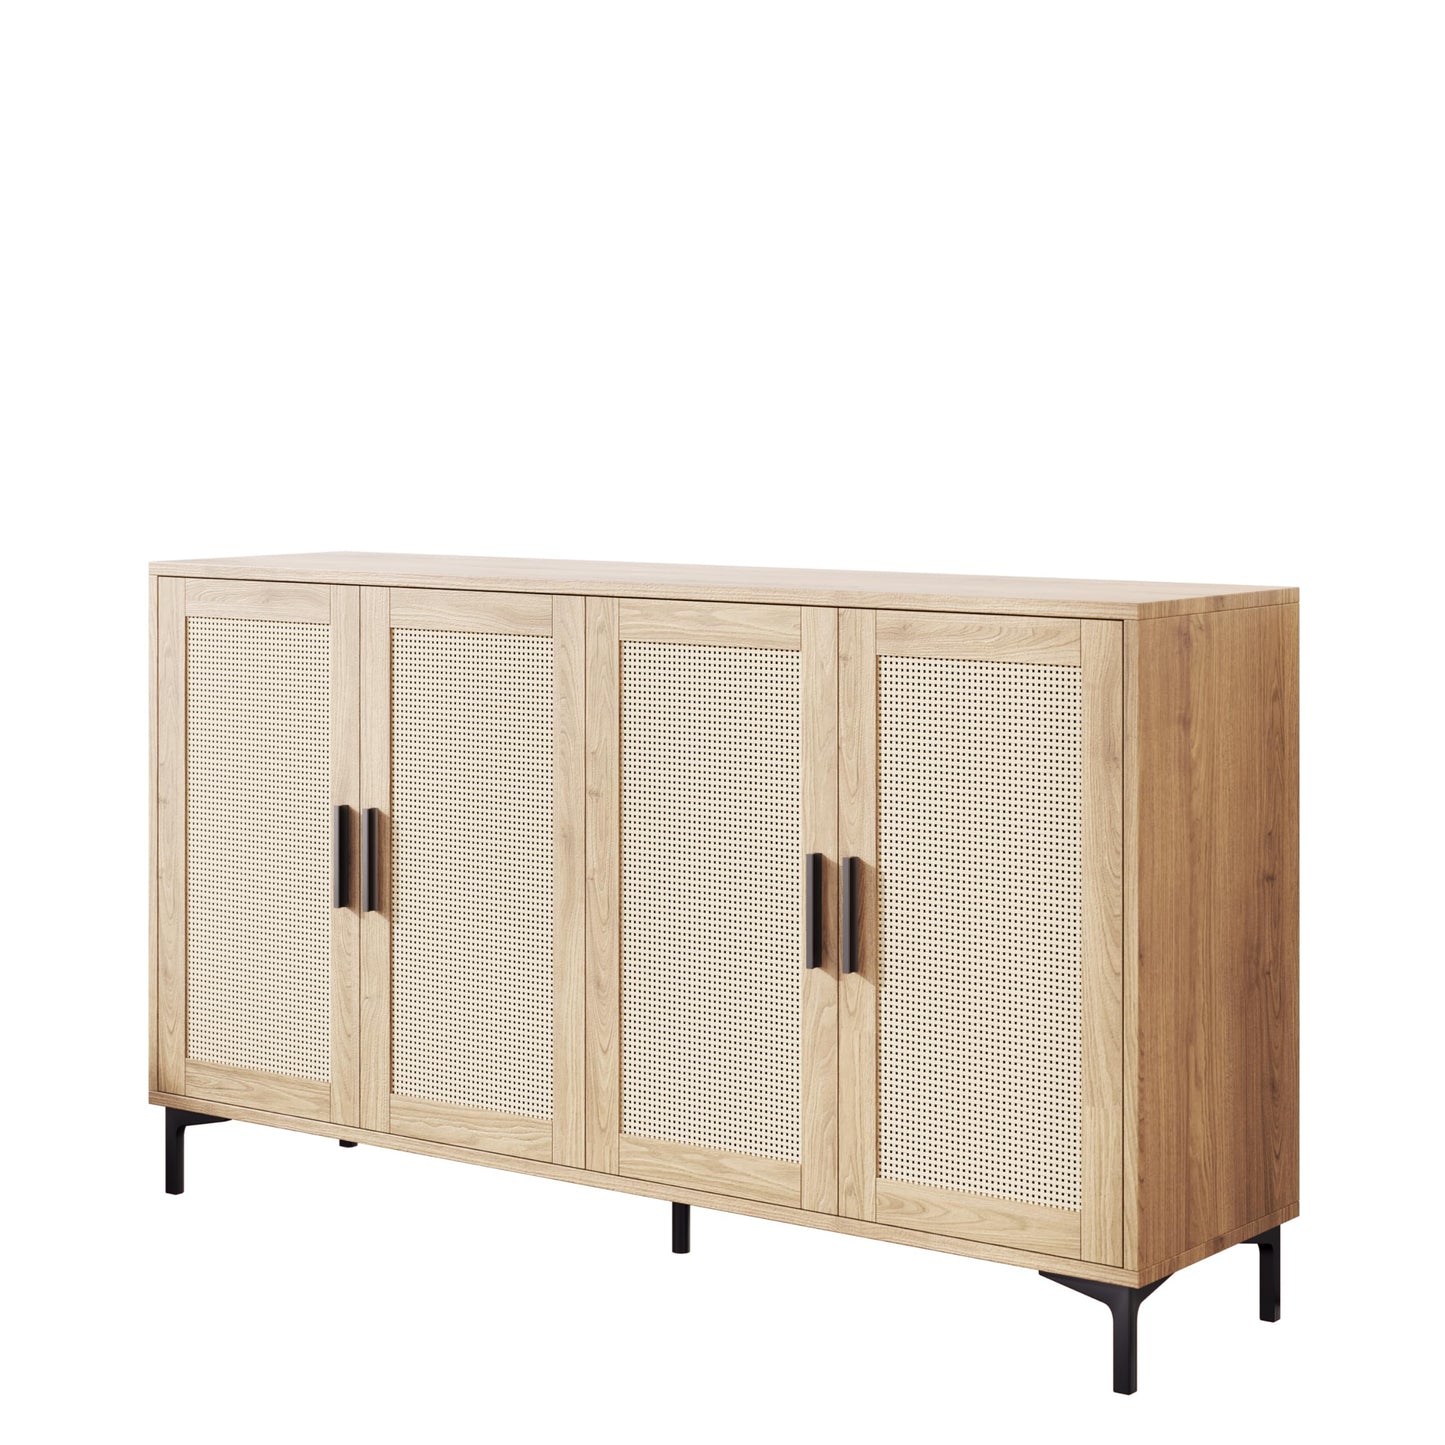 Sideboard - Kitchen Buffet Cabinet with Rattan Decorated Doors, 4 Doors Accent Sideboard Cabinet, Coffee Bar Cabinet Rattan Sideboard for Dining Room, Kitchen, Hallway, Cupboard Console Table,Natural